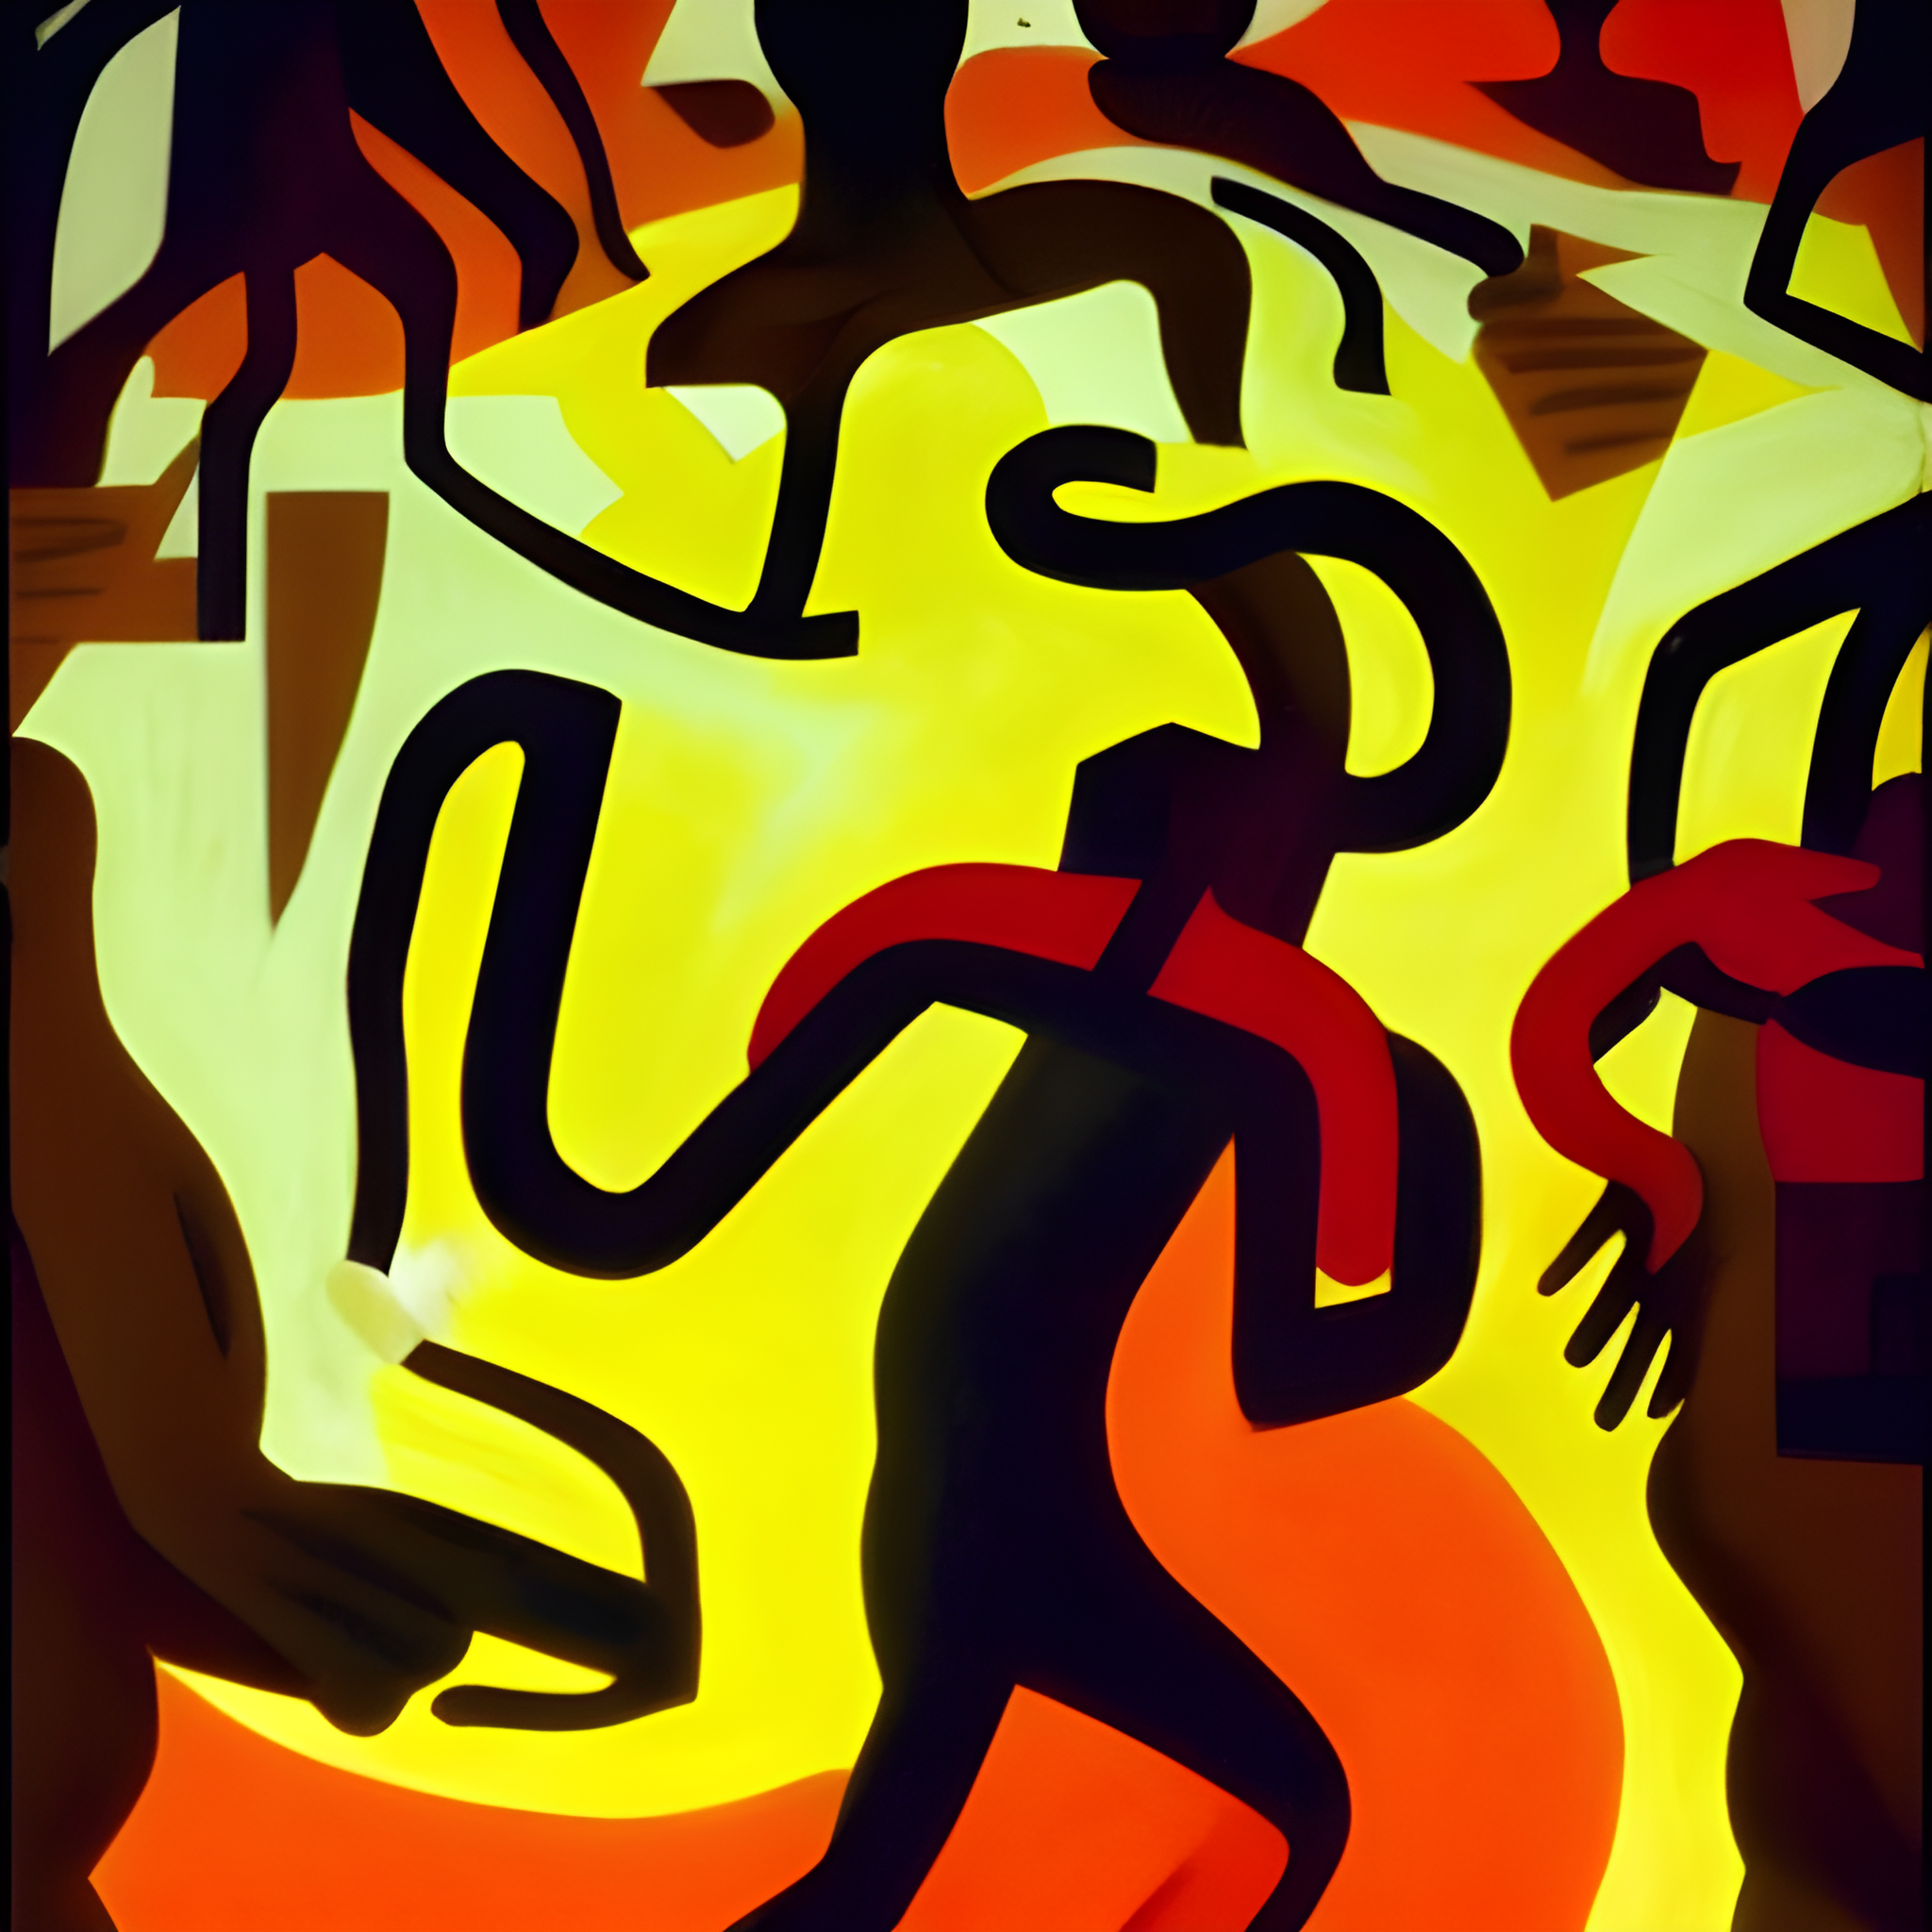 racism-by-jacob-lawrence-and-francis-picabia-perfect-composition-beautiful-detailed-intricate-ins-529511507 (2).png